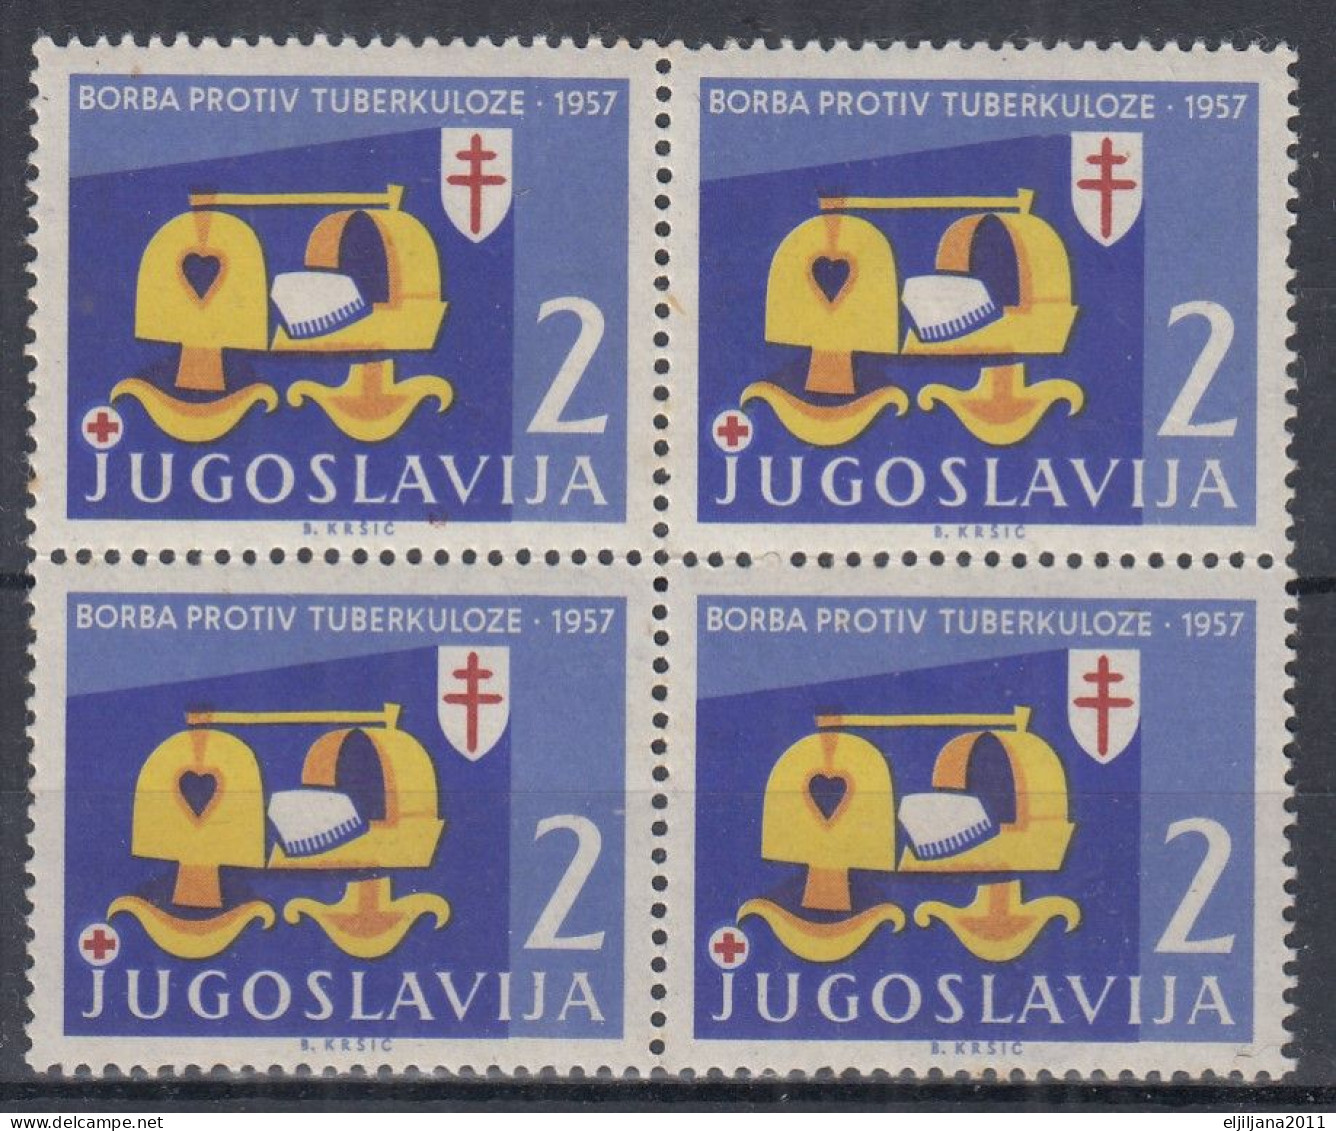 Action !! SALE !! 50 % OFF !! ⁕ Yugoslavia 1957 ⁕ Red Cross / Fight Against Tuberculosis ⁕ MNH Block Of 4 - Bienfaisance